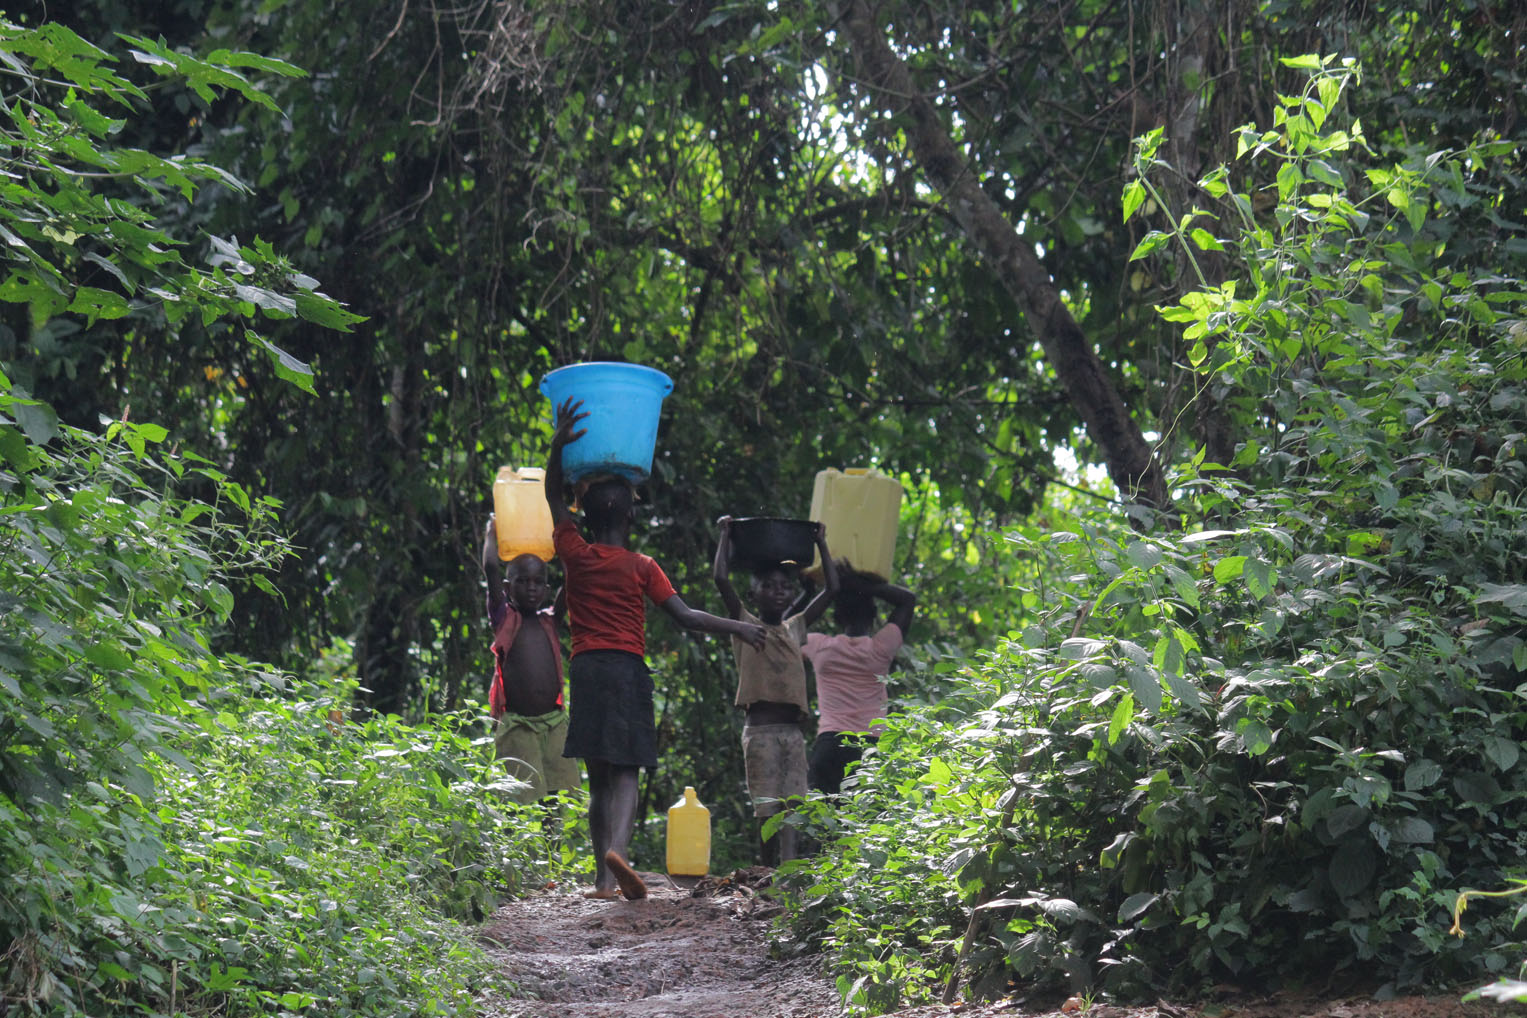 To access water, many families in the bush areas of the country are required to make trips into the bush. Children, too.